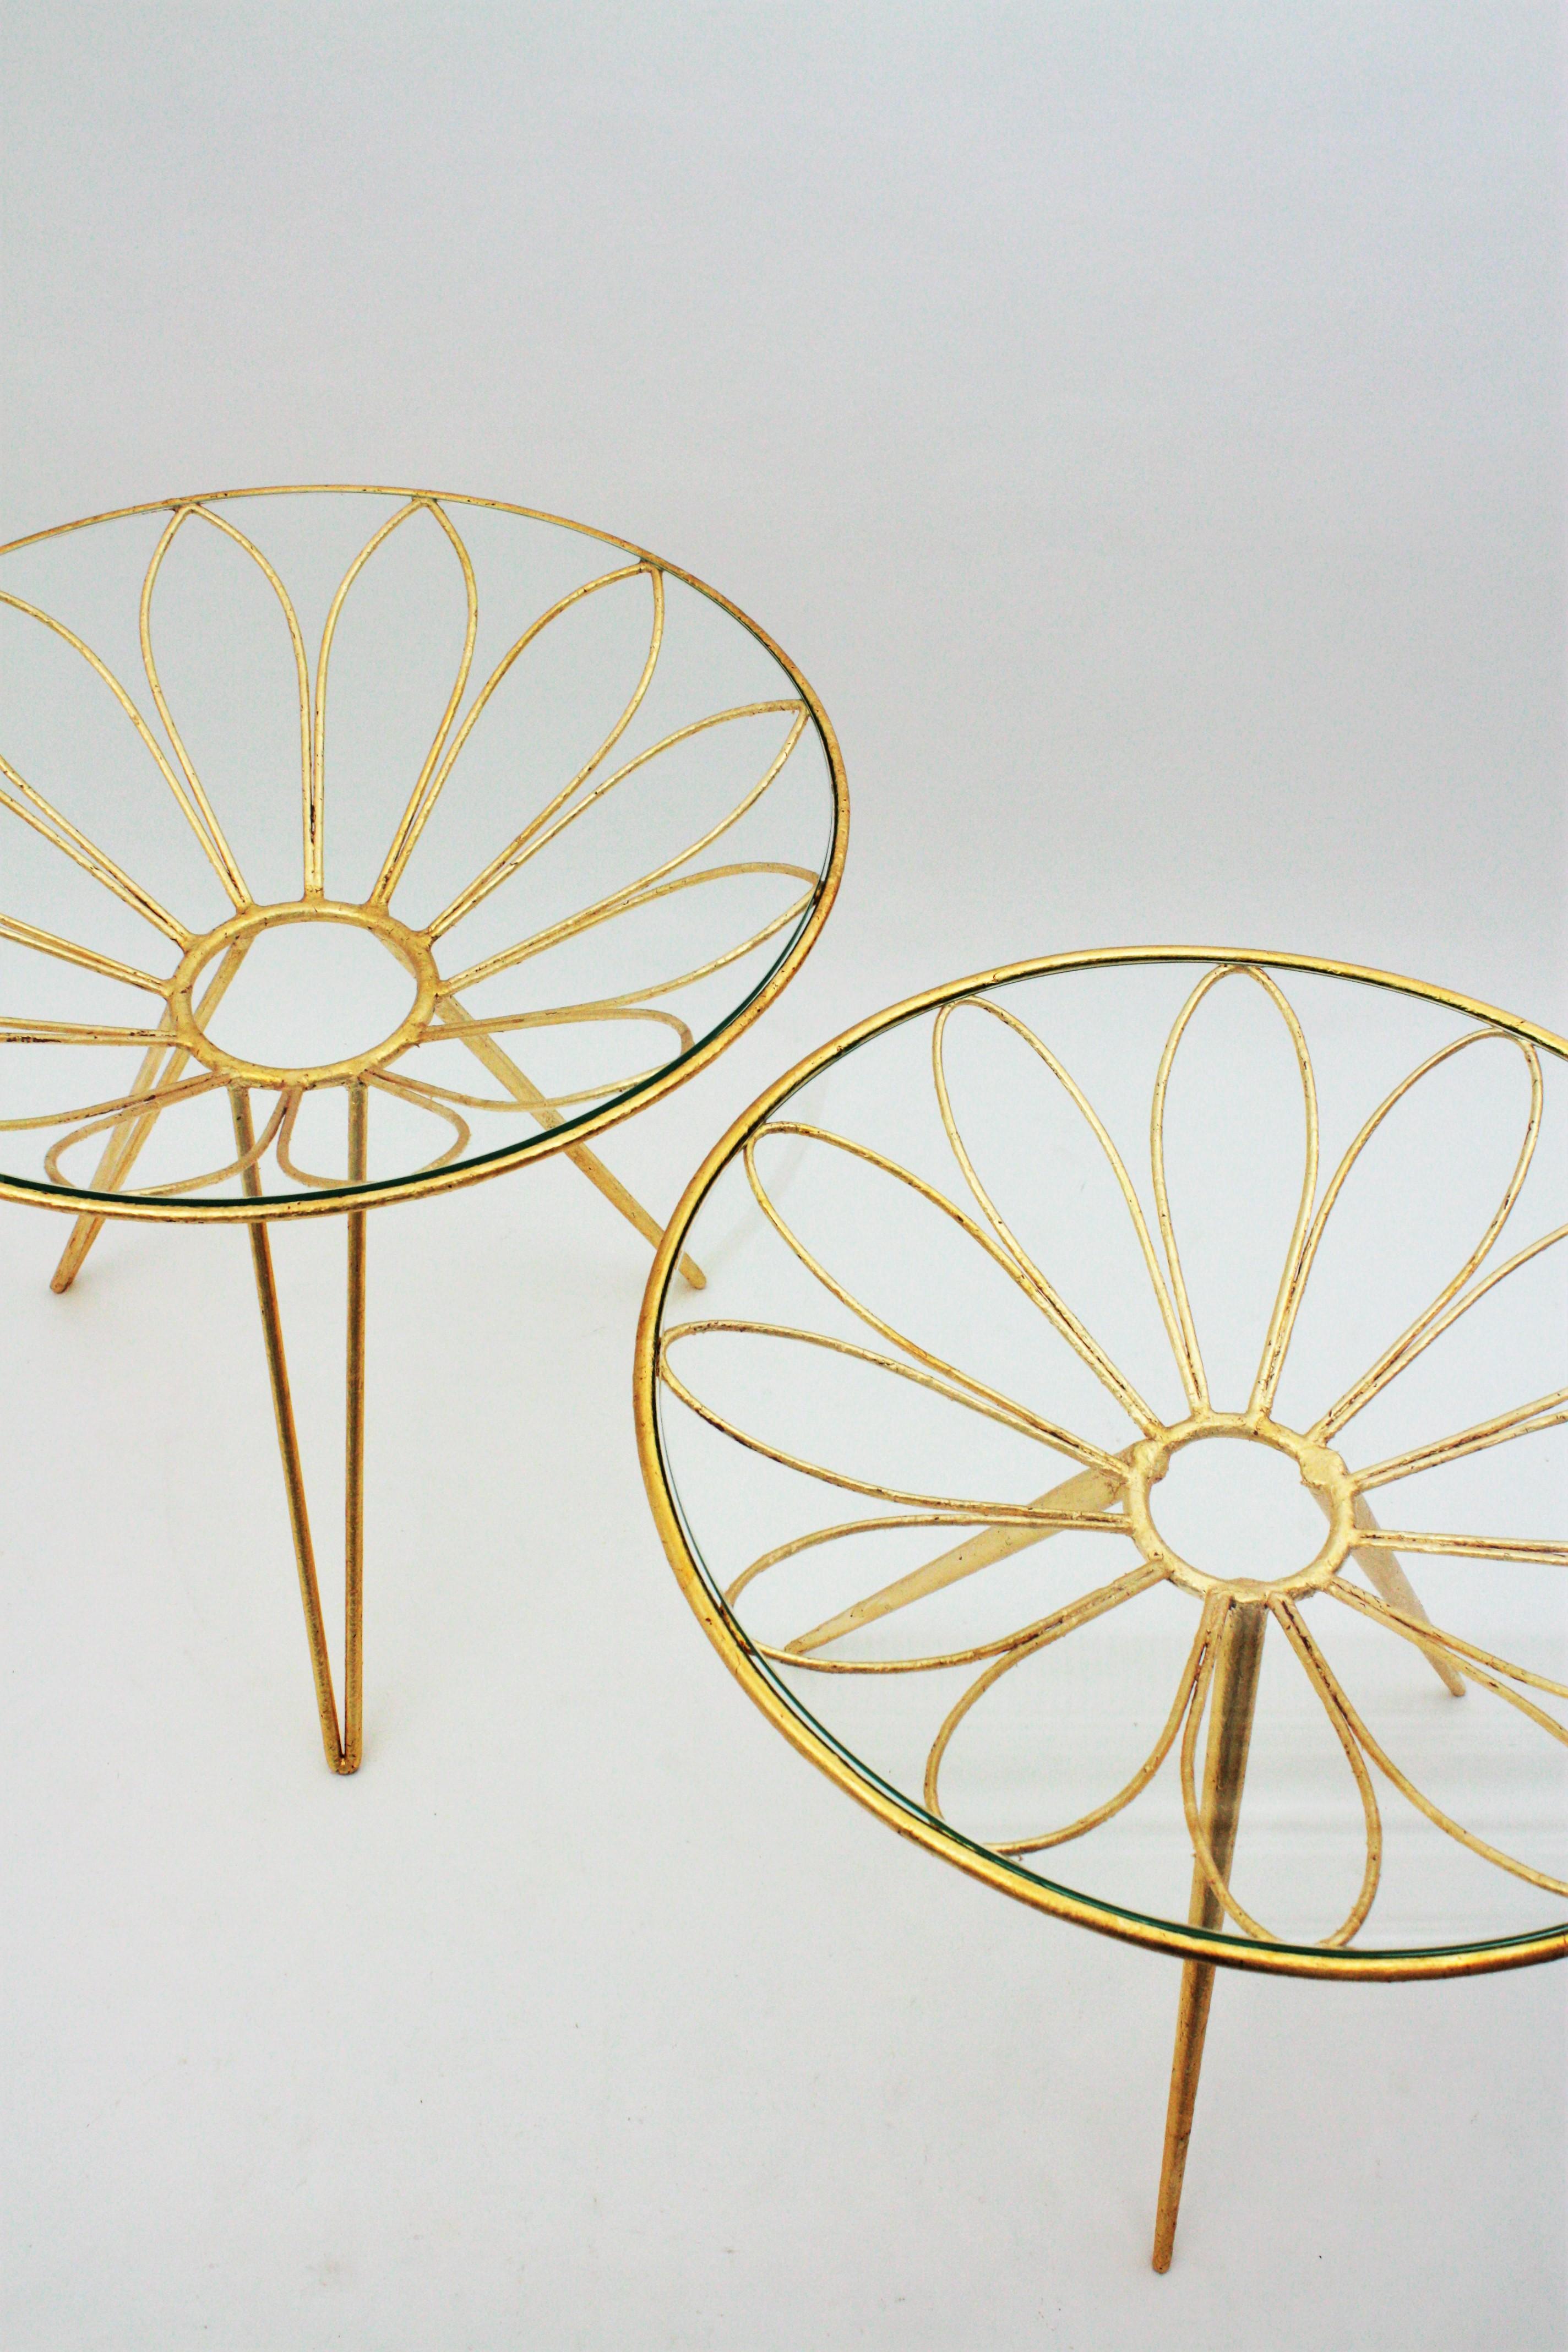 French Side Tables in Gilt Iron Daisy Flower Design, 1950s For Sale 3